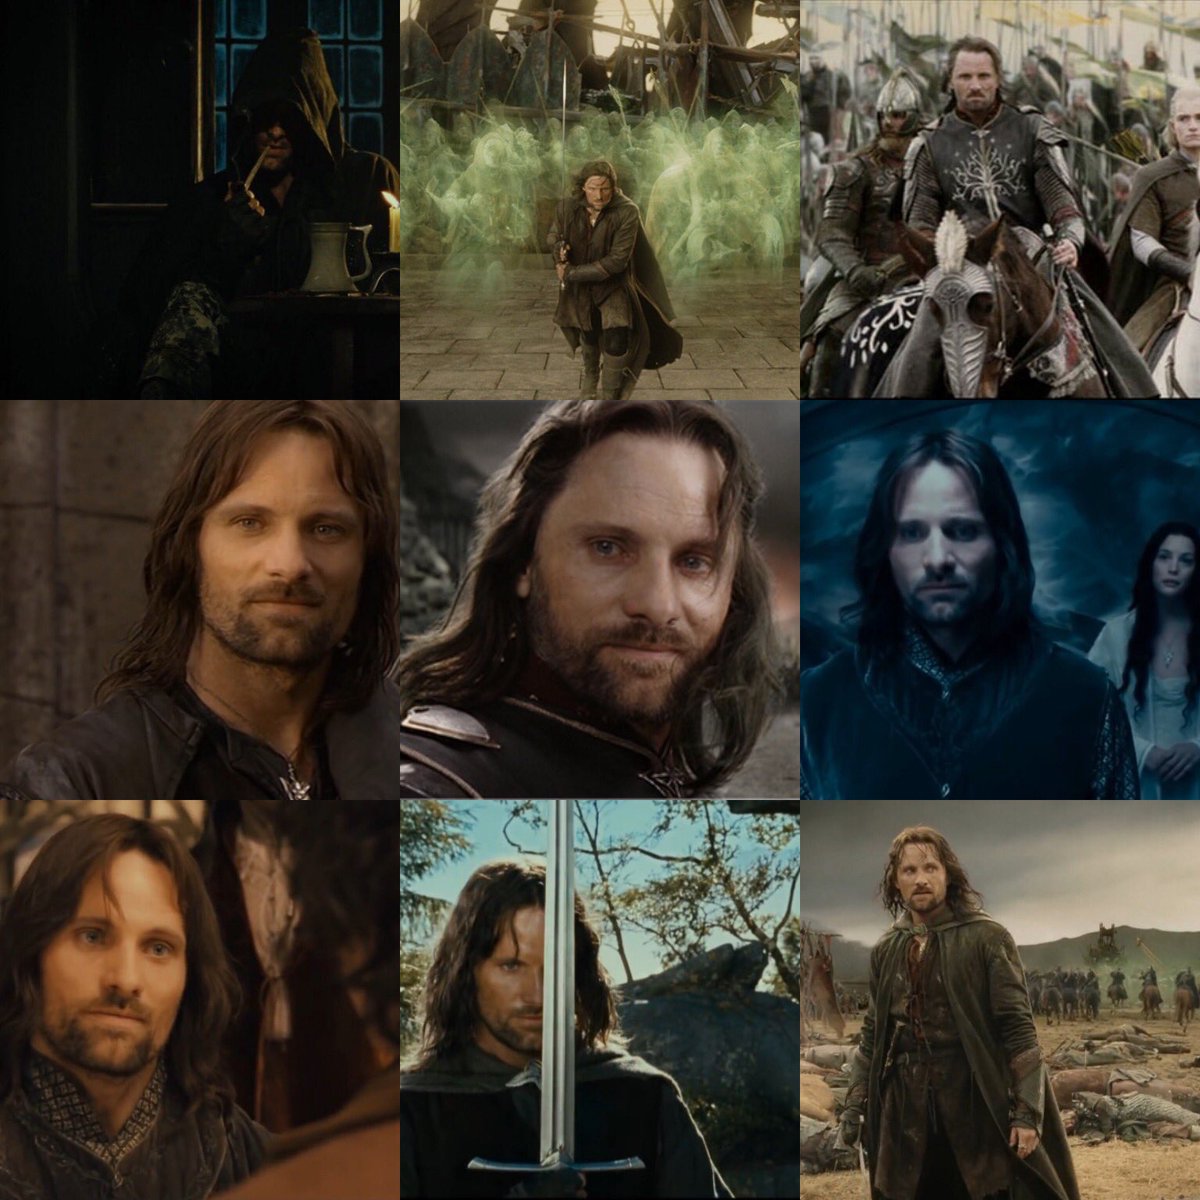 This is no mere ranger, this is Aragorn, son of Arathorn and heir to the throne of Gondor